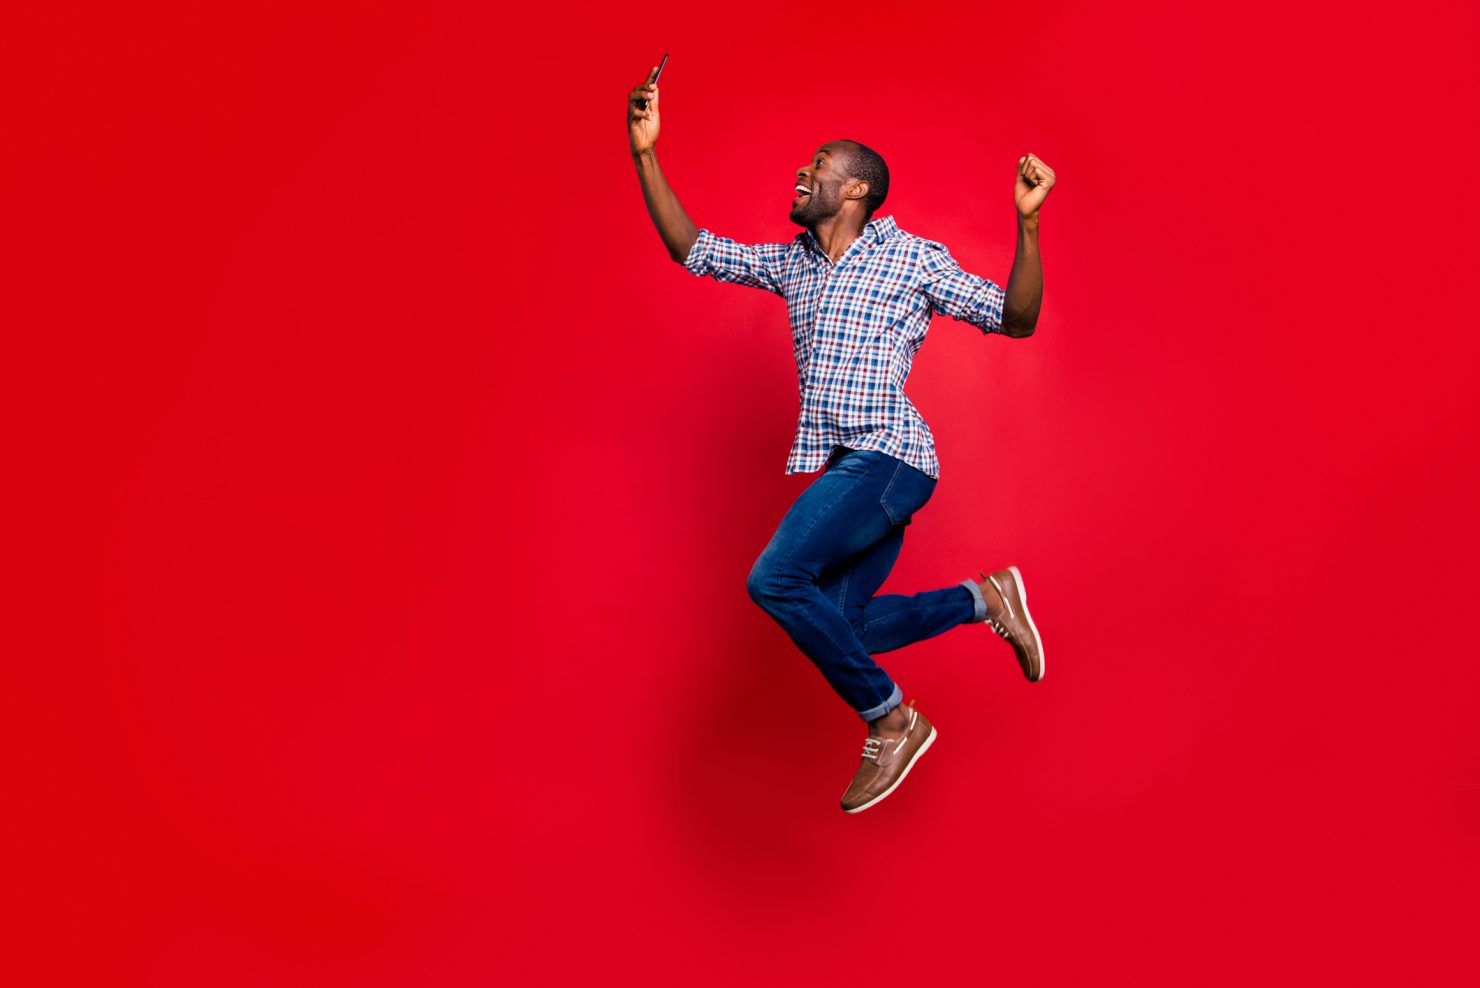 Photo of a young man of African descent jumping in the air while holding and looking at a cell phone. He is smiling and visibly happy. The backdrop is red.